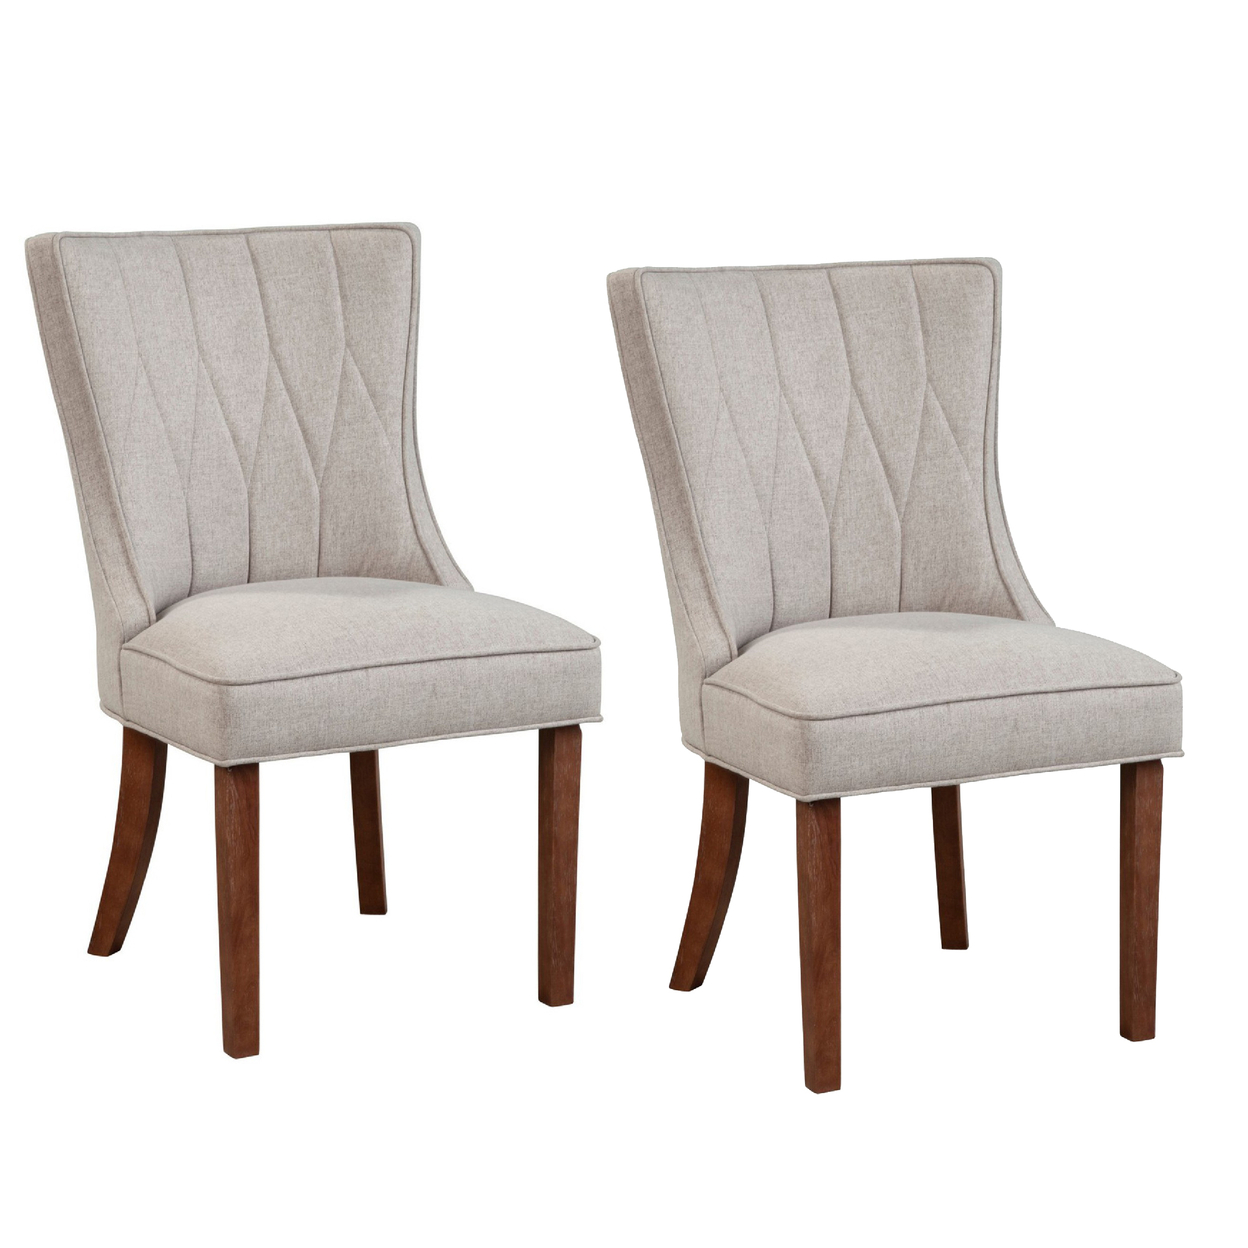 Paige 25 Inch Dining Side Chair, Fabric Upholstery, Set Of 2, Beige, Brown- Saltoro Sherpi